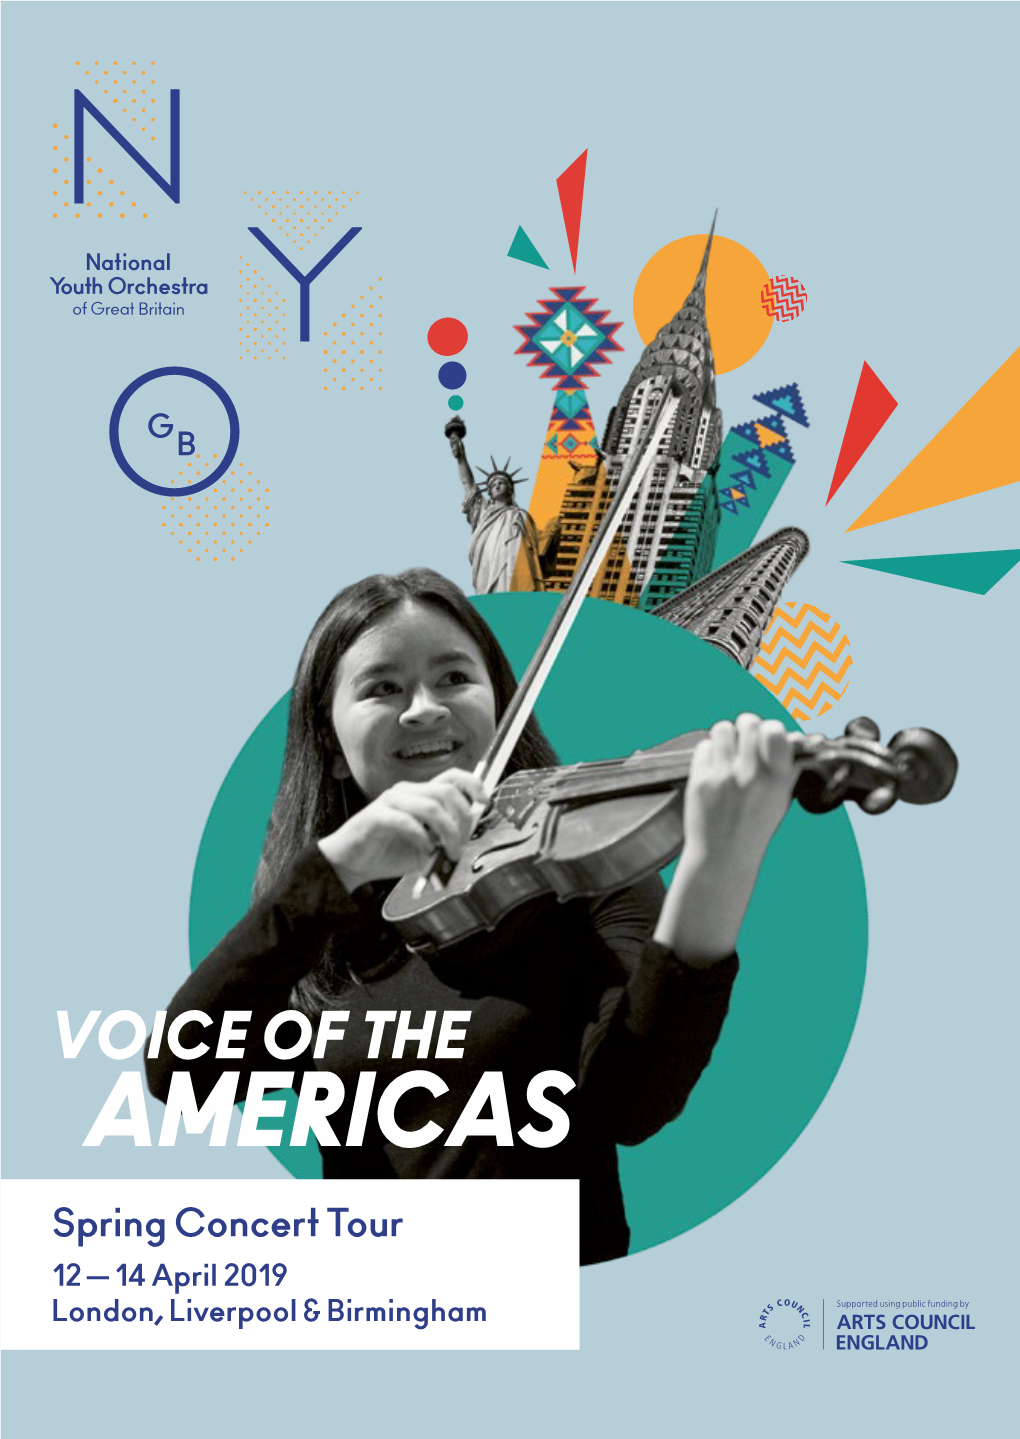 AMERICAS Spring Concert Tour 12 — 14 April 2019 London, Liverpool & Birmingham NATIONAL YOUTH ORCHESTRA of GREAT BRITAIN